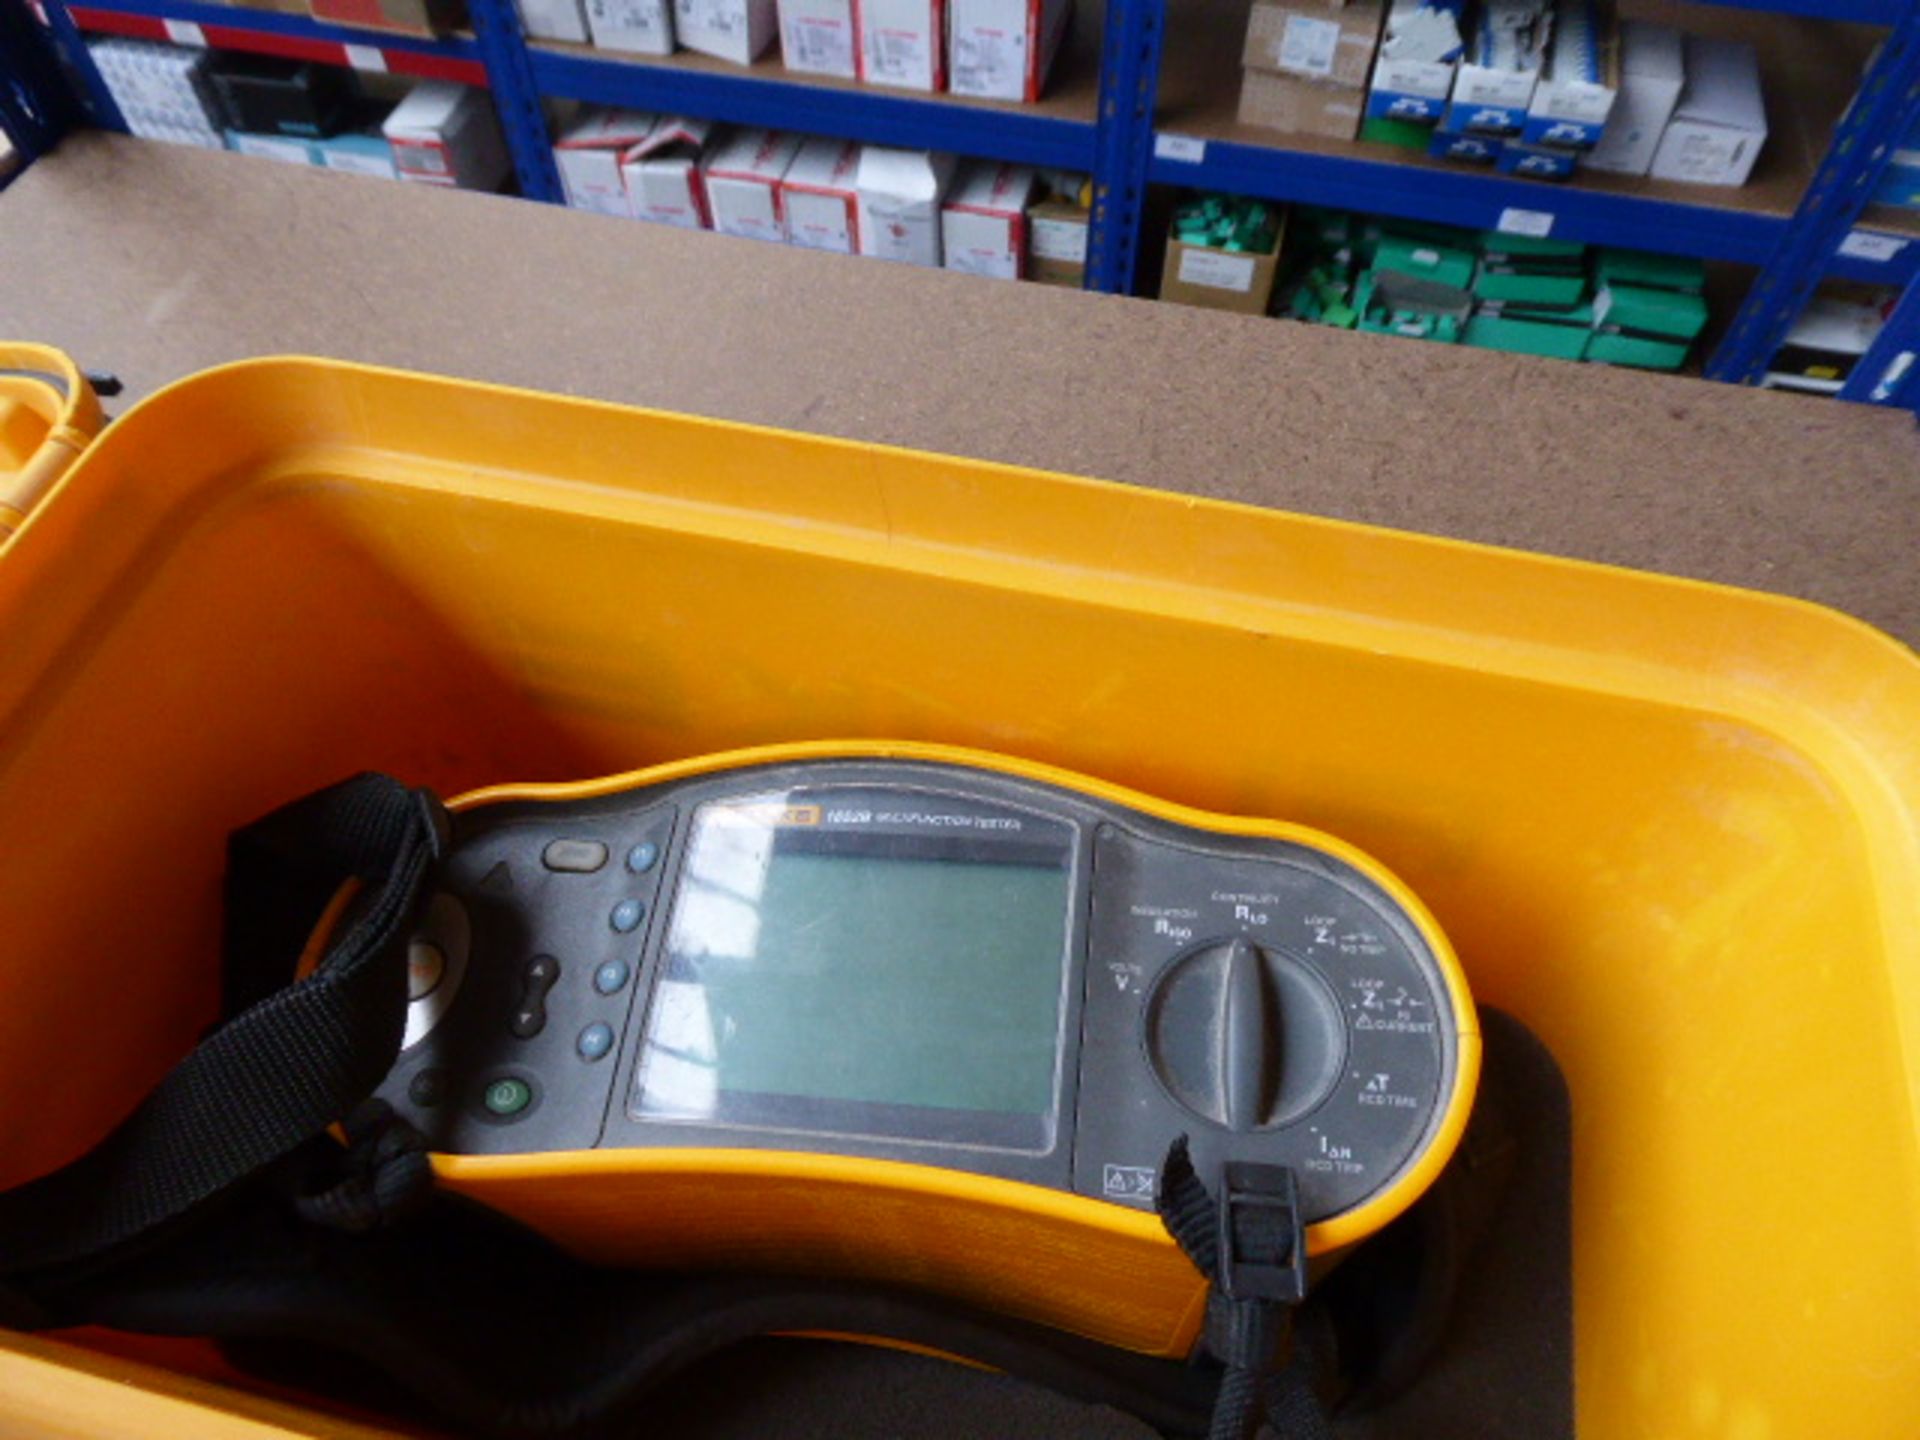 A Fluke model 1652B multifuction tester with associated cabling in carrying case